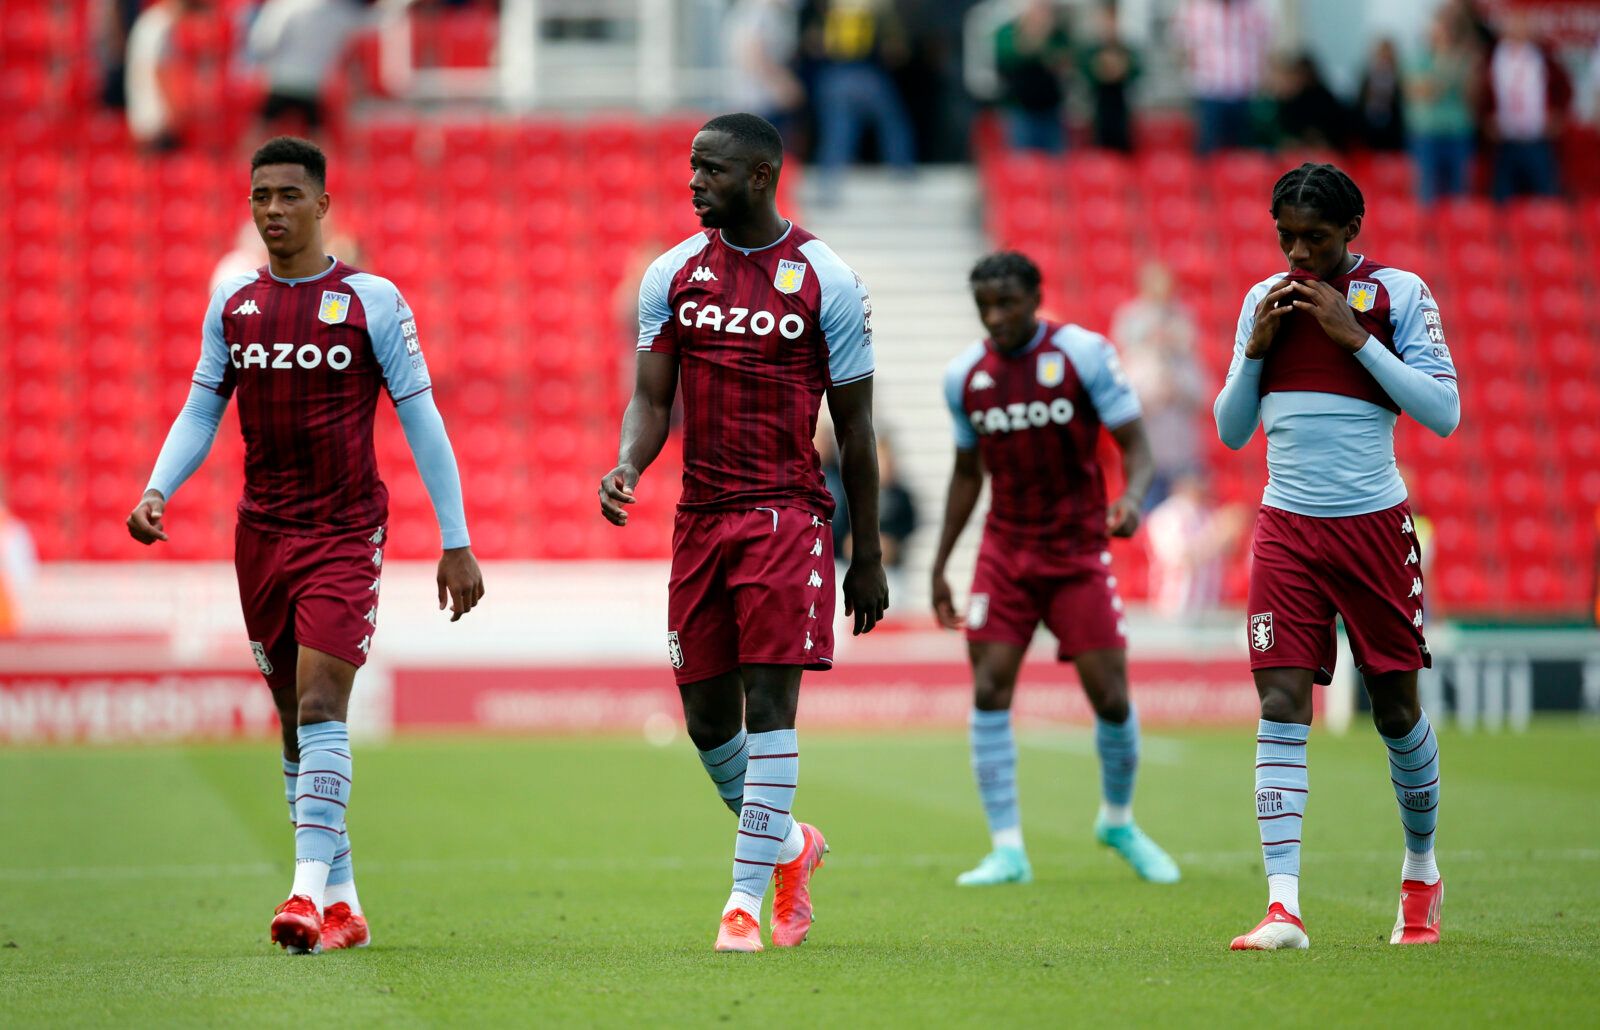 Soccer Football - Pre Season Friendly - Stoke City v Aston Villa - bet365 Stadium, Stoke-on-Trent, Britain - July 24, 2021  Aston Villa's Keinan Davis and his teammates look dejected at the end of the match Action Images via Reuters/Ed Sykes